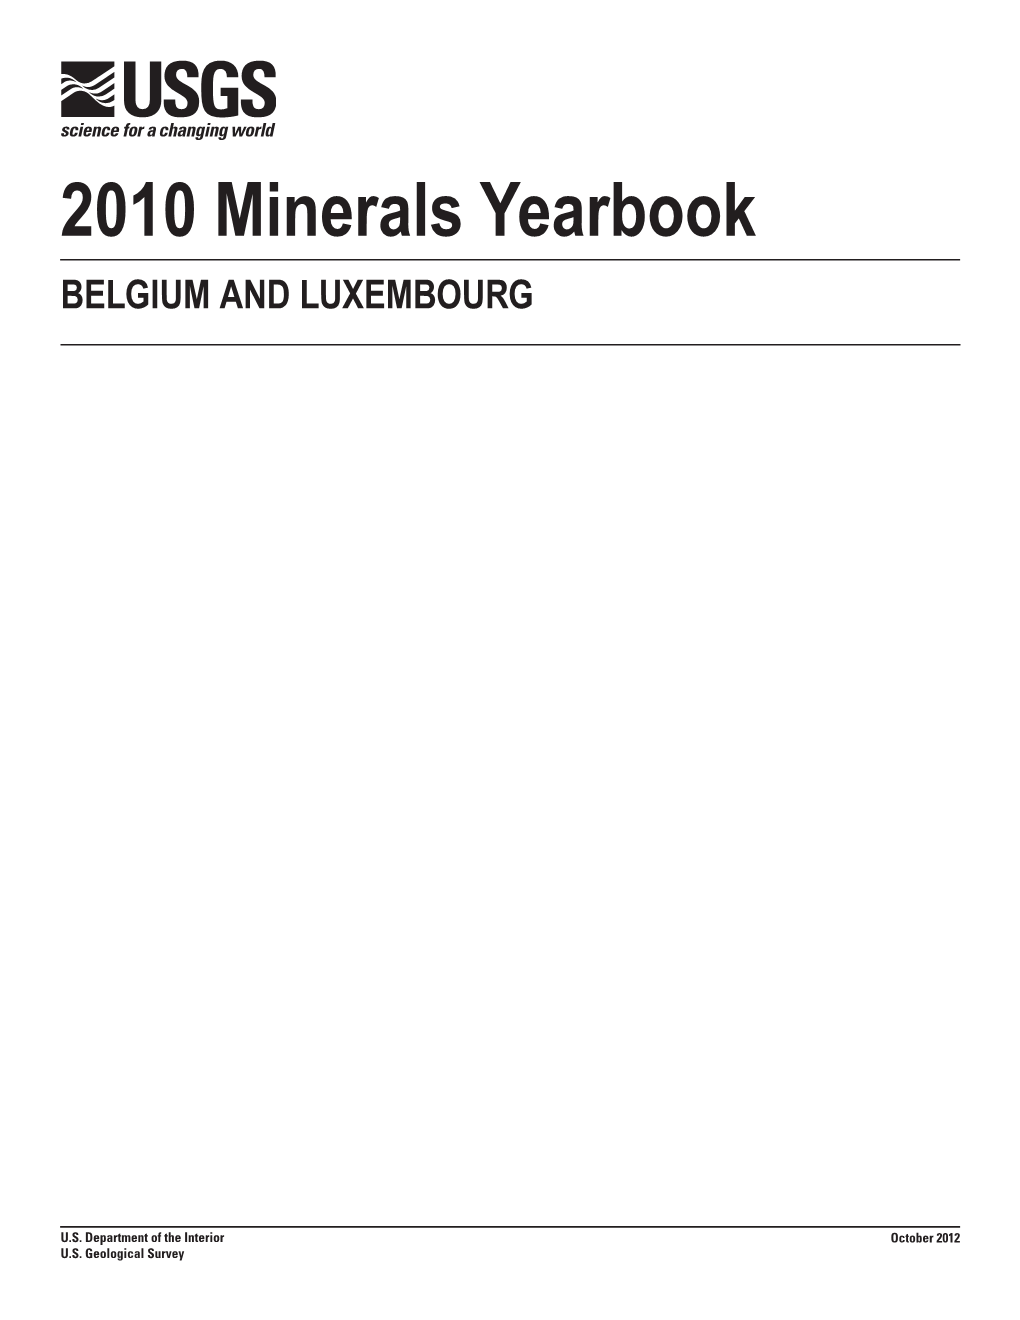 The Mineral Industries of Belgium and Luxembourg in 2010